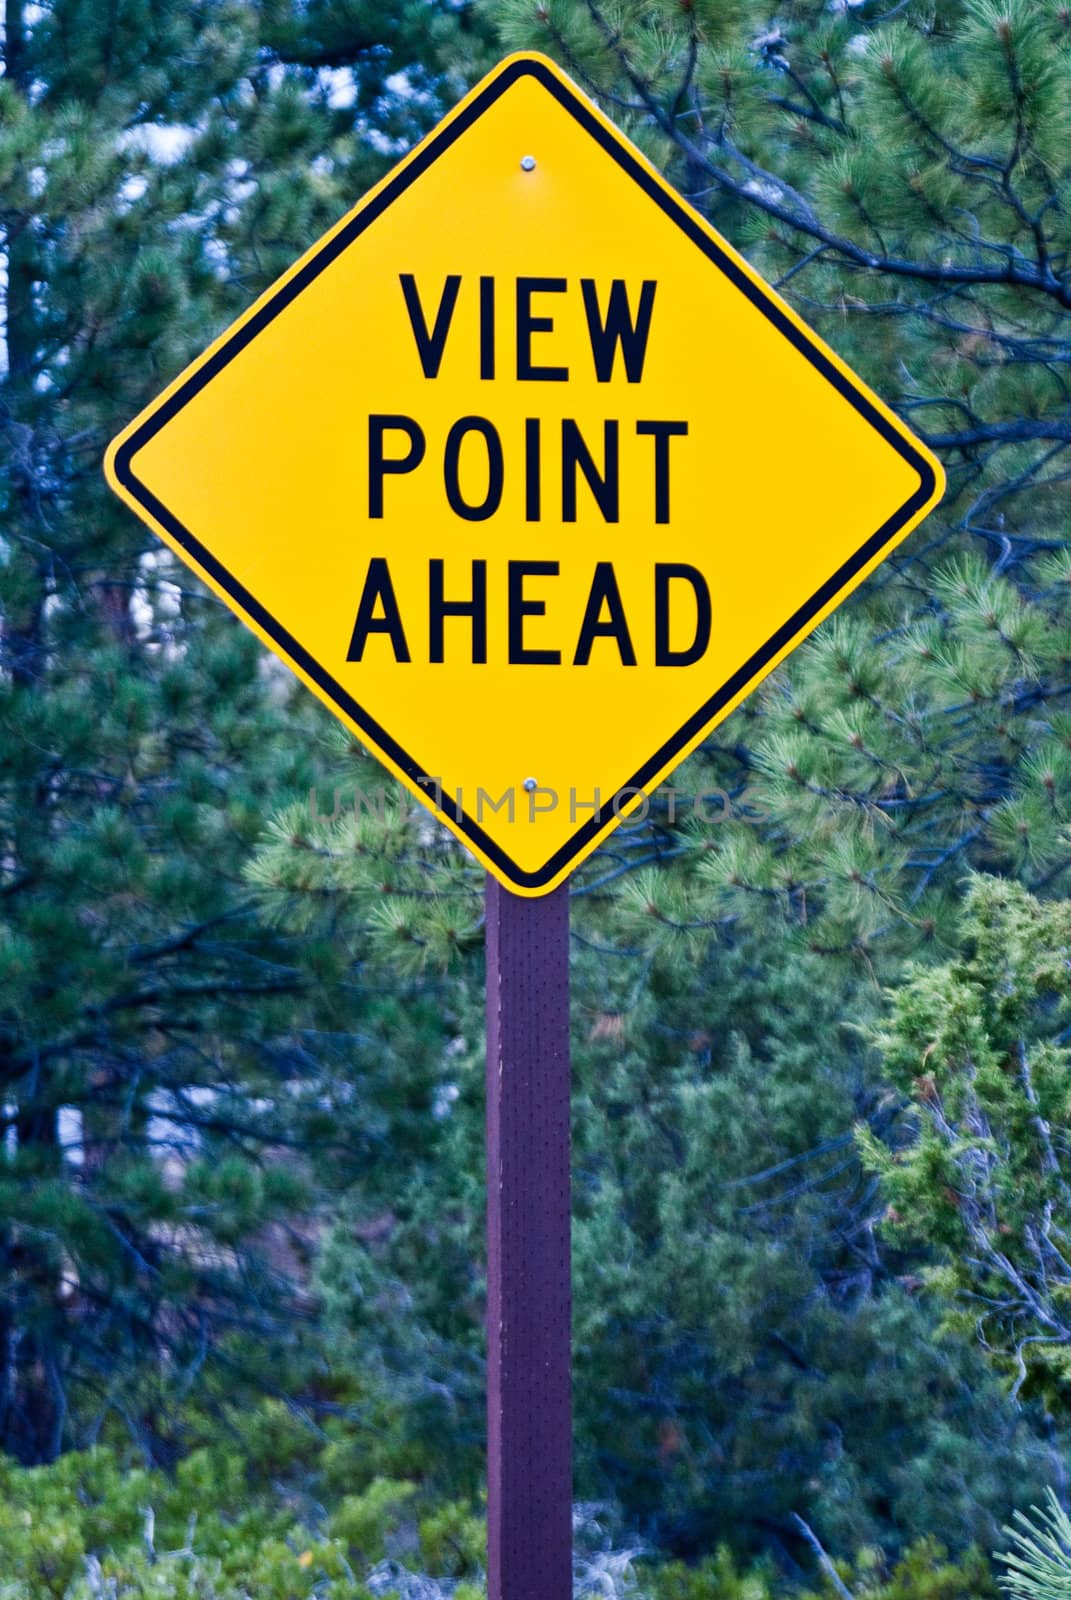 Sign for View Point Ahead, USA